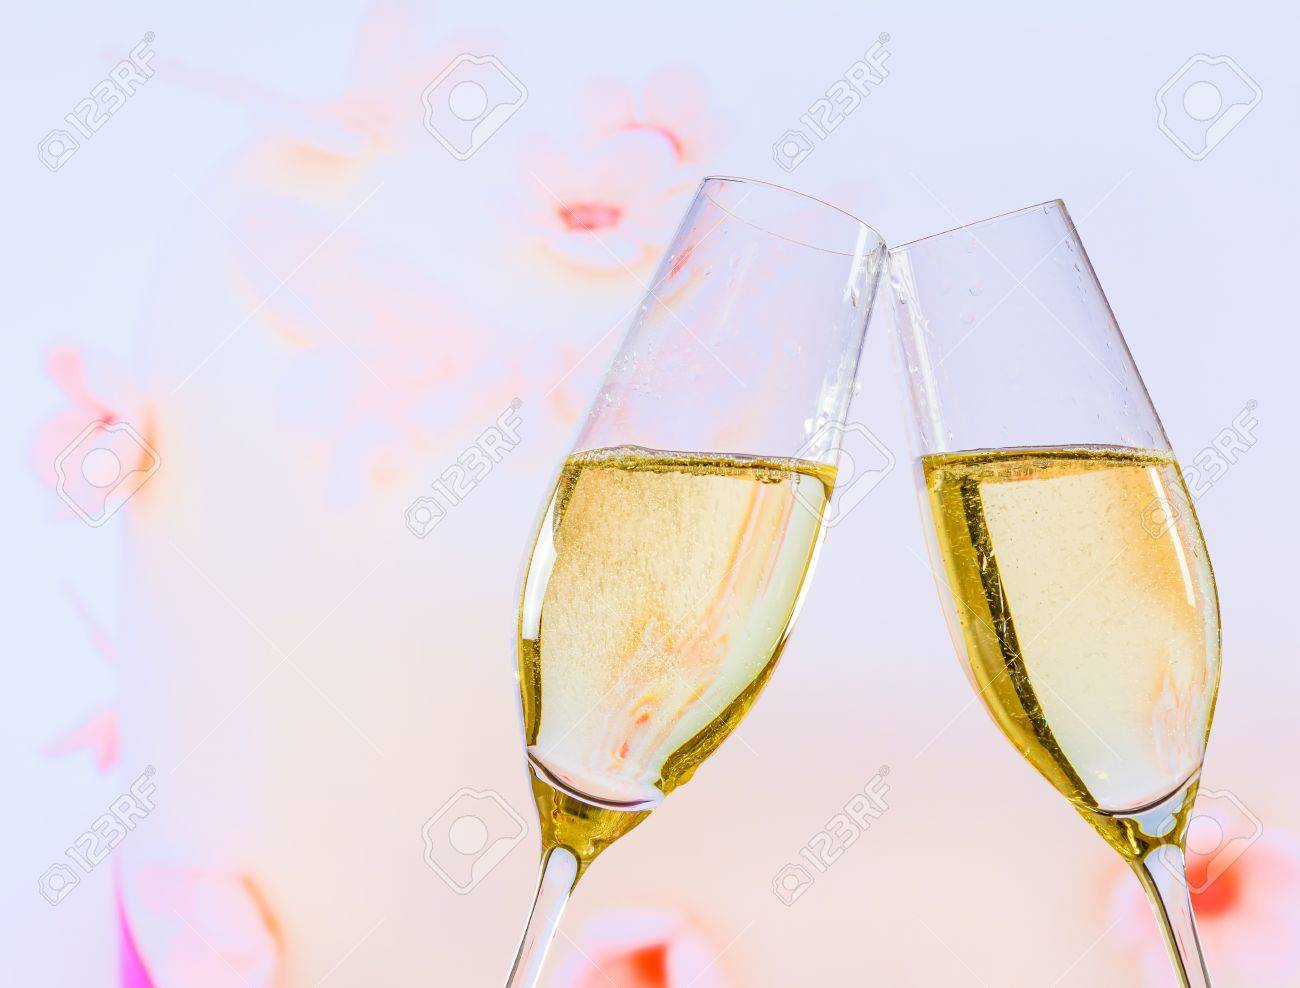 Champagne Flutes With Golden Bubbles Make Cheers On Wedding Cake